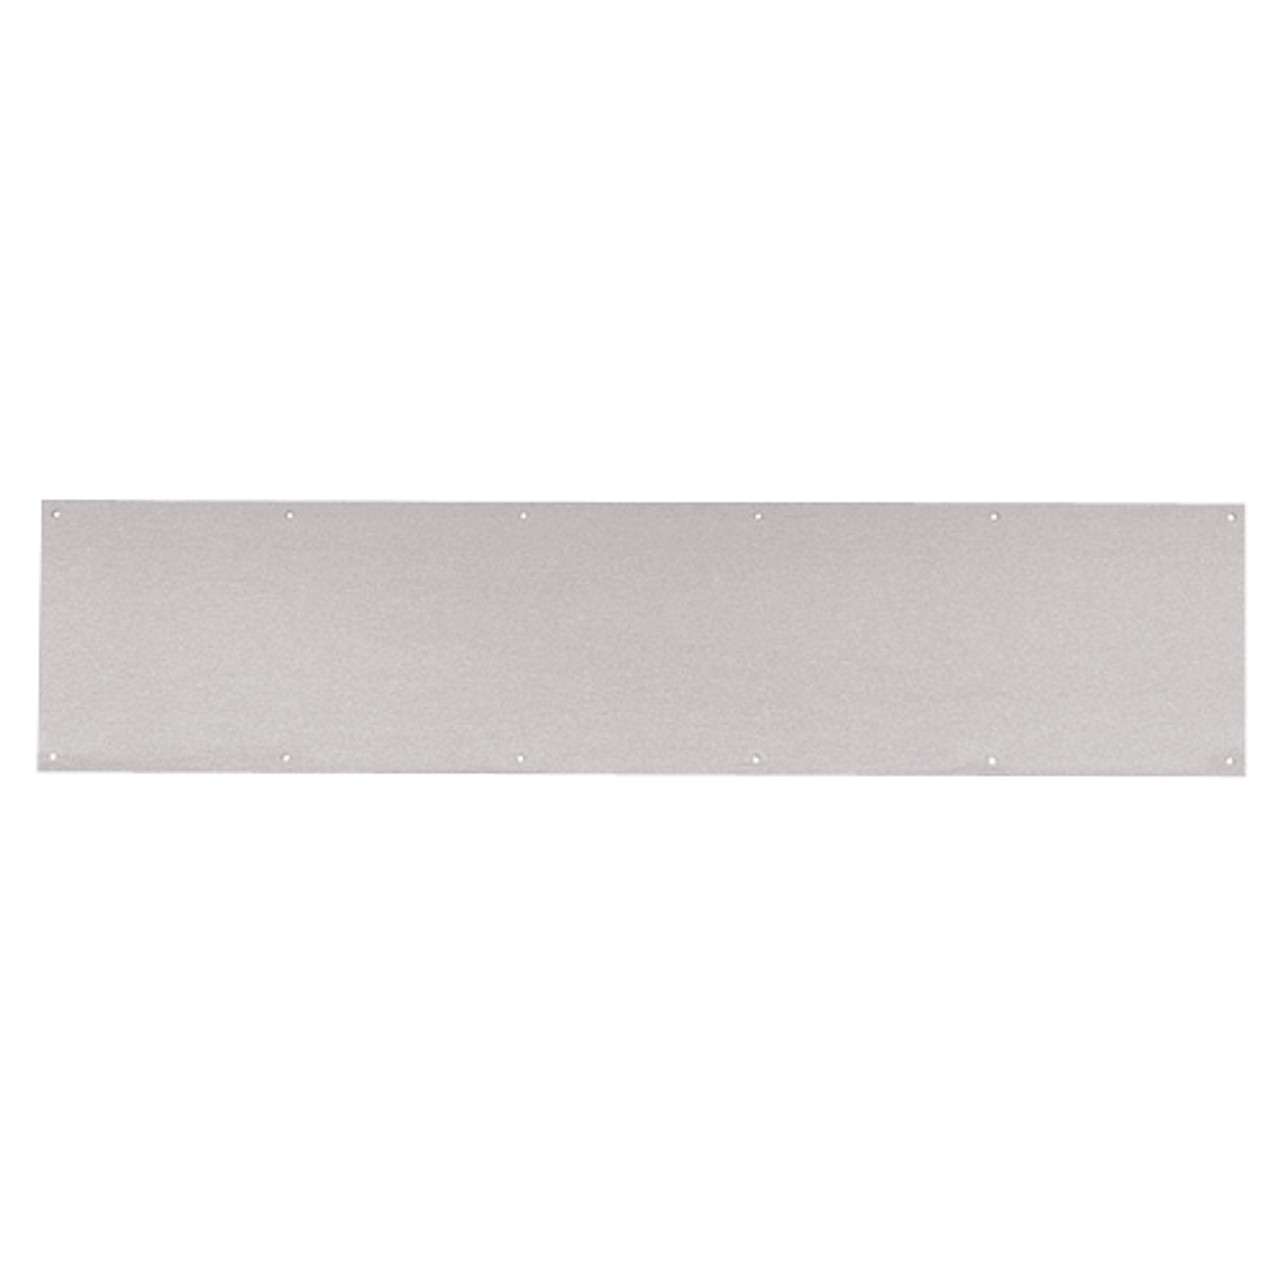 8400-US32D-8x46-B-CS Ives 8400 Series Protection Plate in Satin Stainless Steel